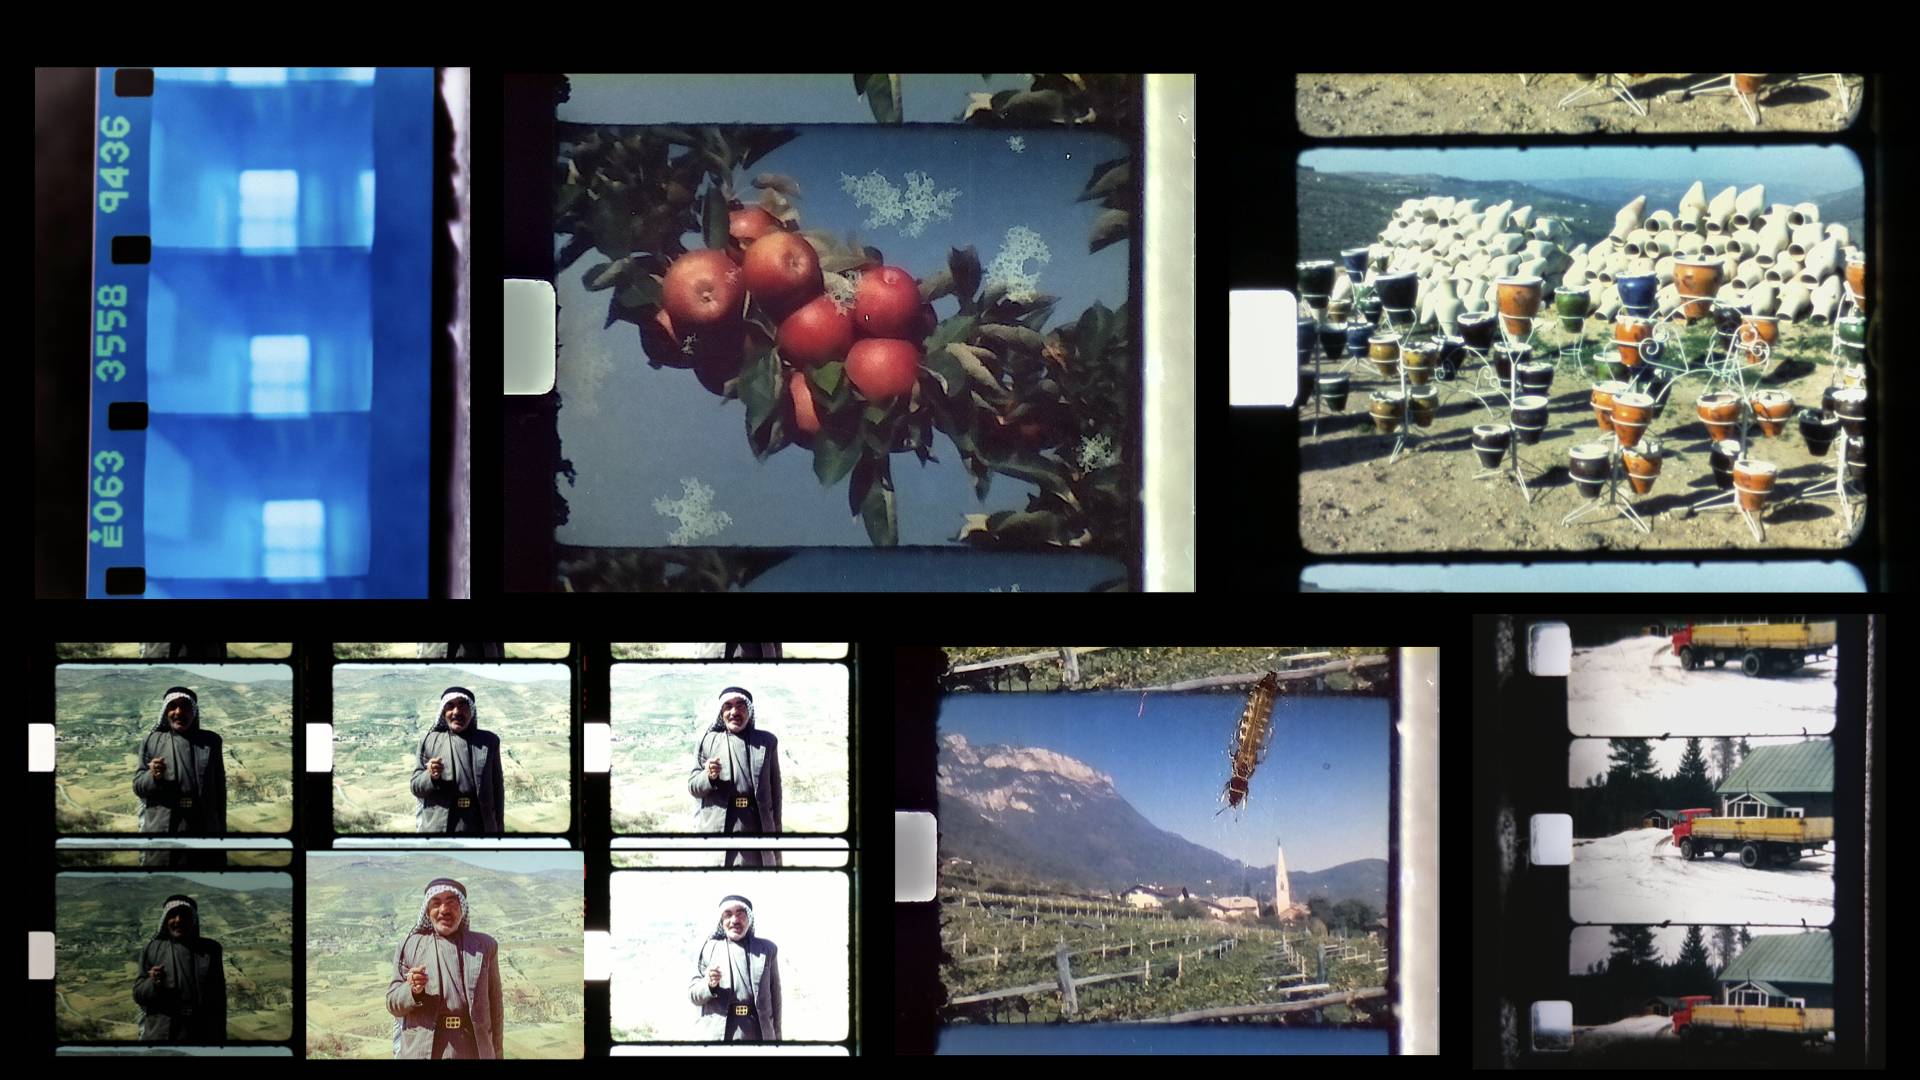 Collaged images of filmic material from the referenced Soviet film cannisters found in Amman